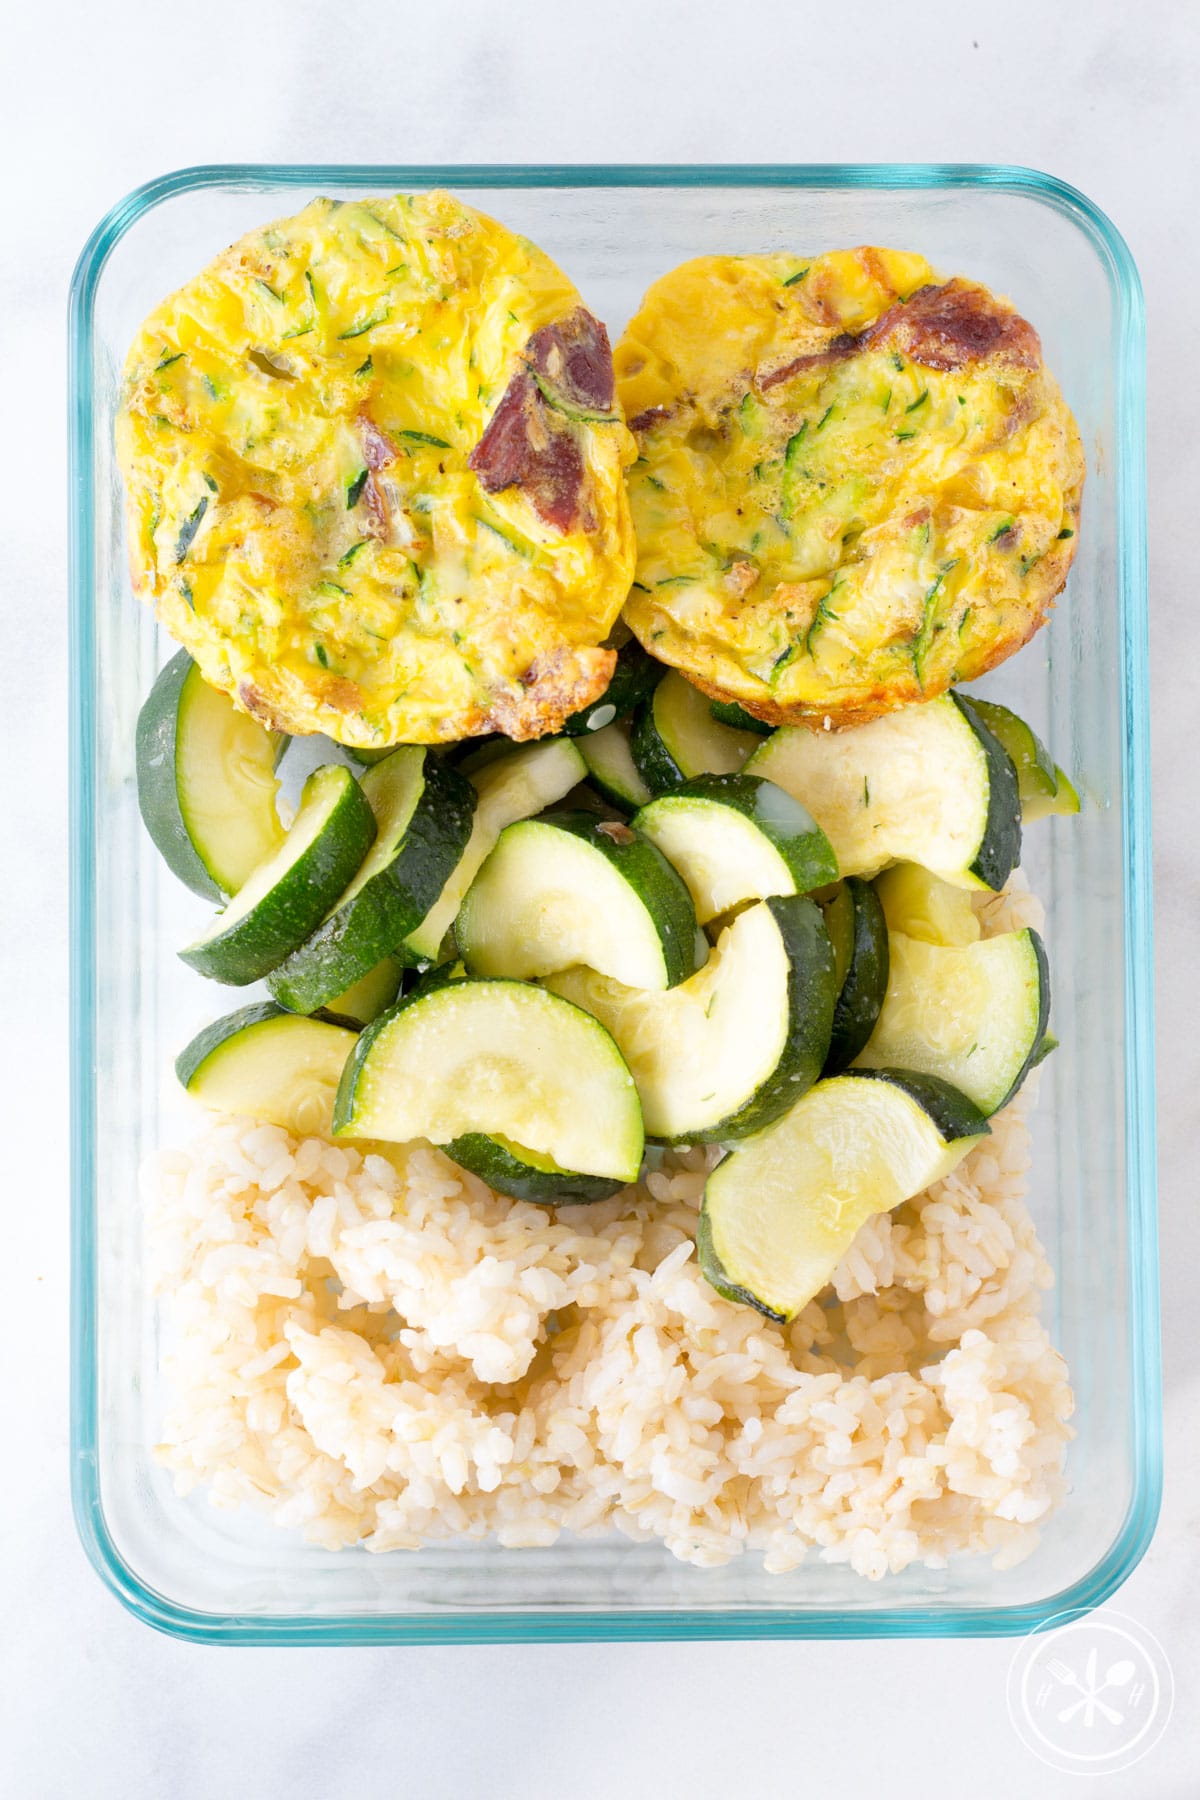 Egg muffins with zucchini in a meal prep container